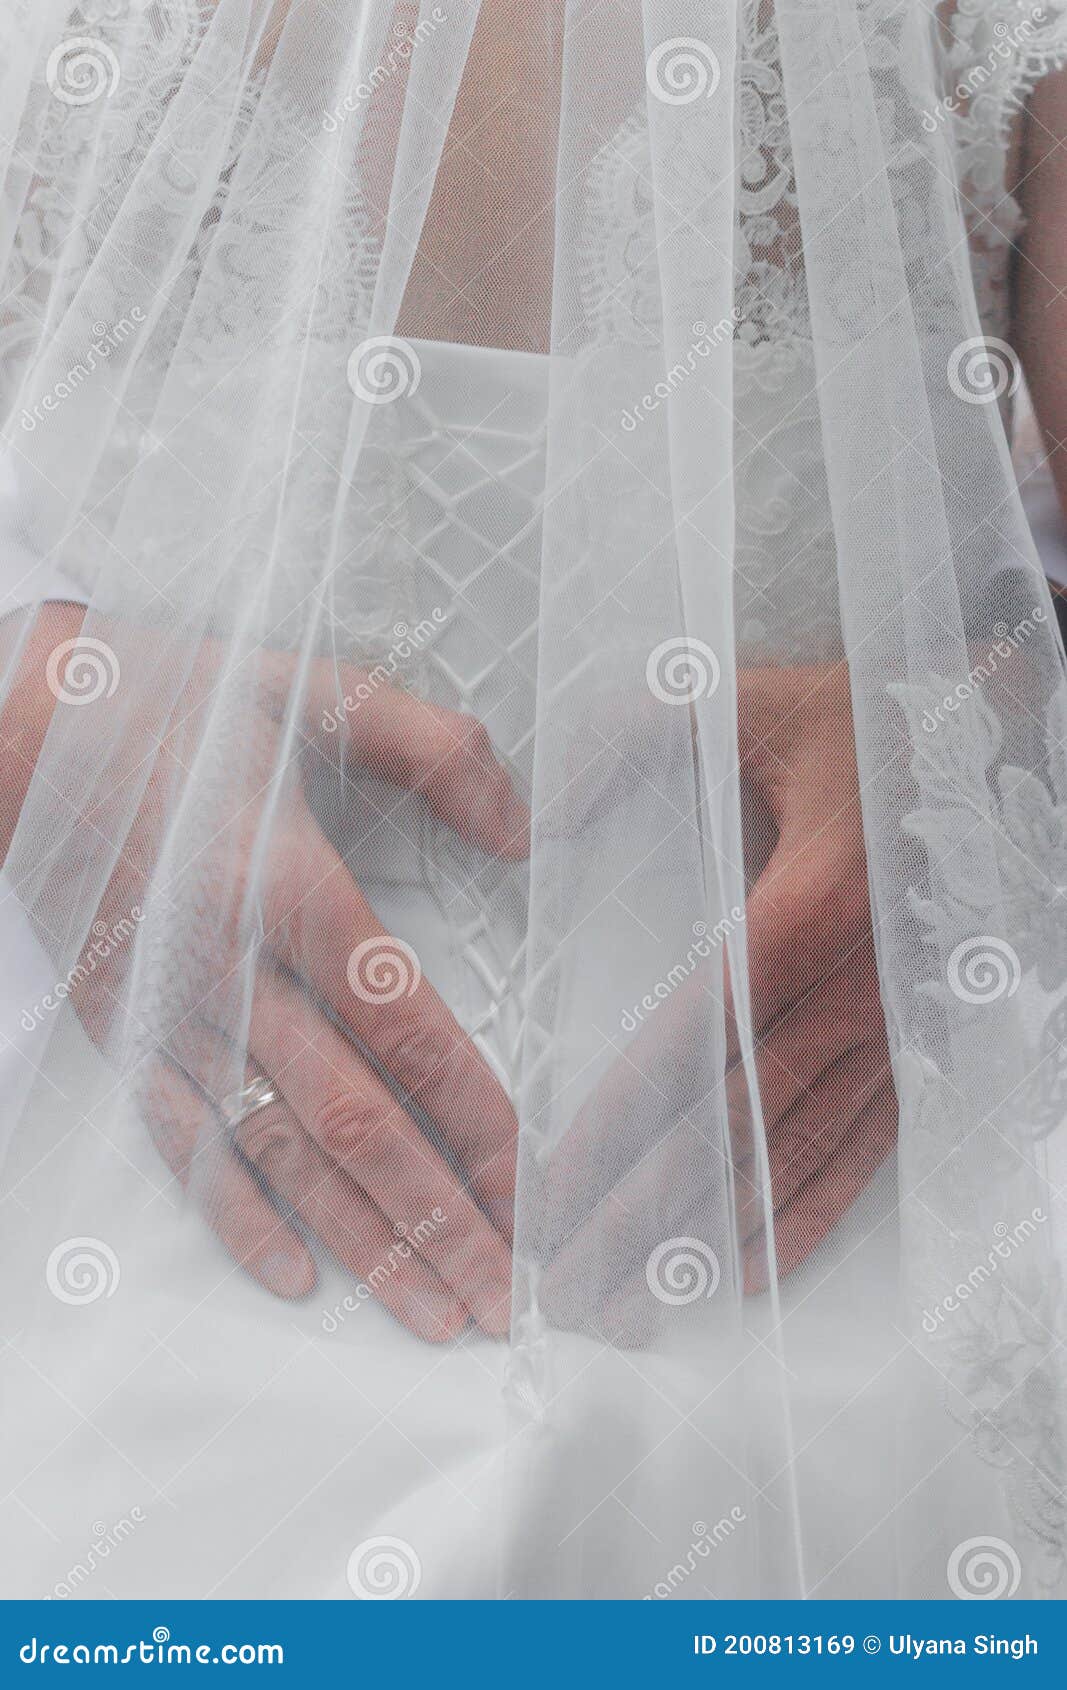 Groom Hug Bride by Waist and His Hands in Heart Shape Symbol Under ...